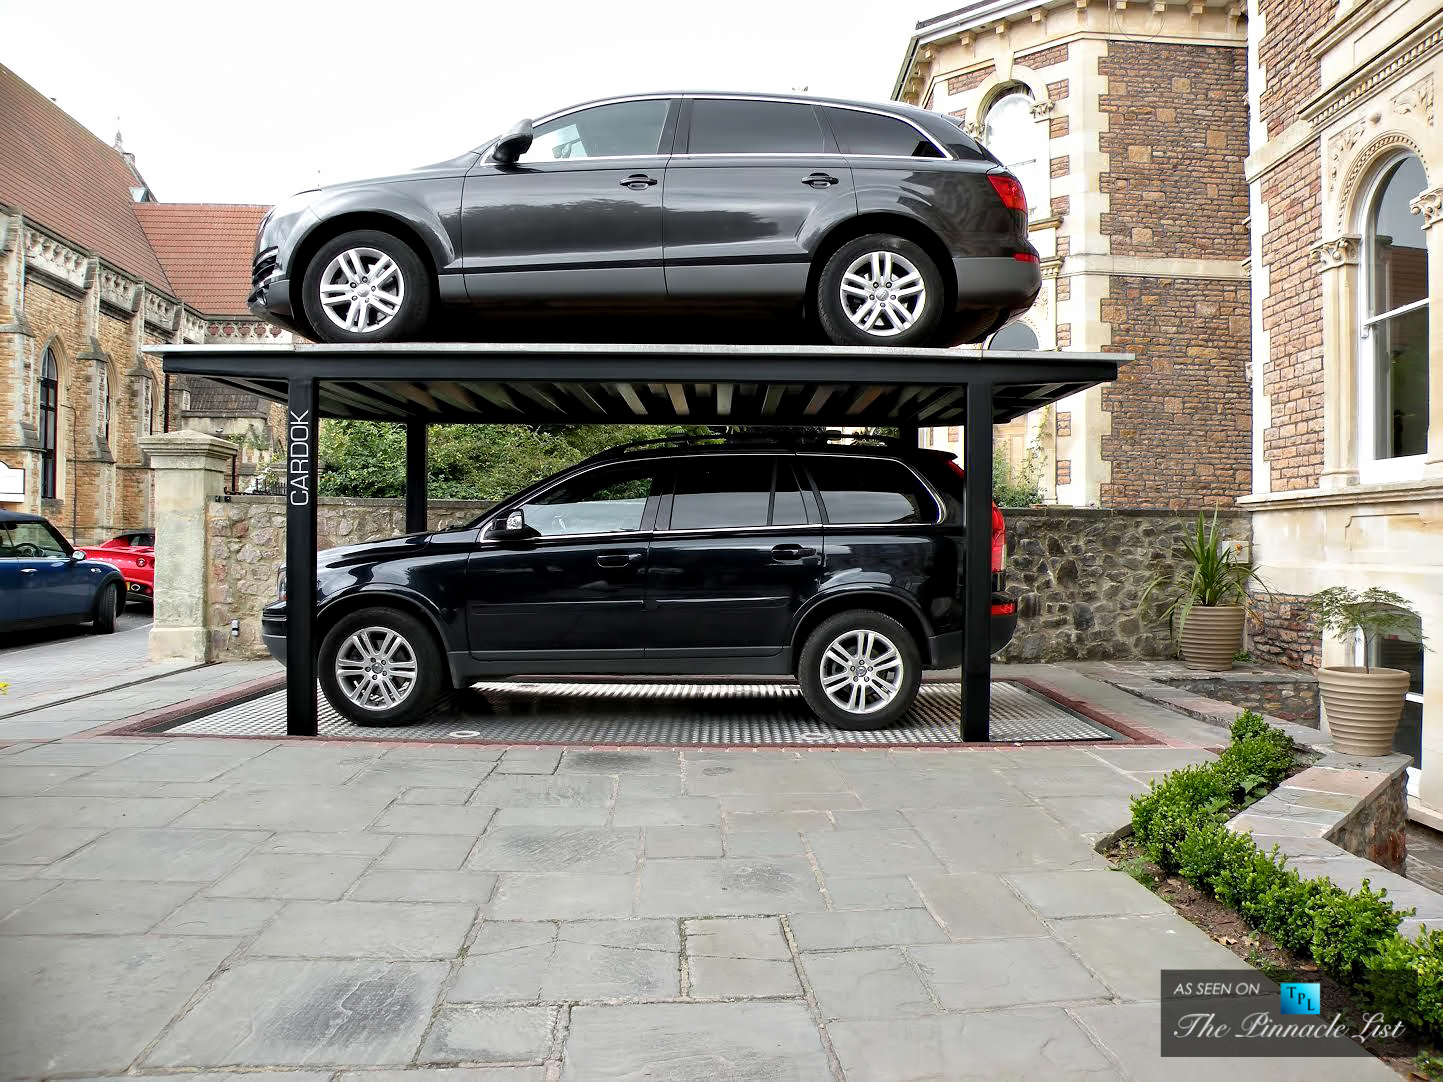 Cardok Underground Garage – The Ultimate Urban Solution for Secure Luxury Car Parking and Storage